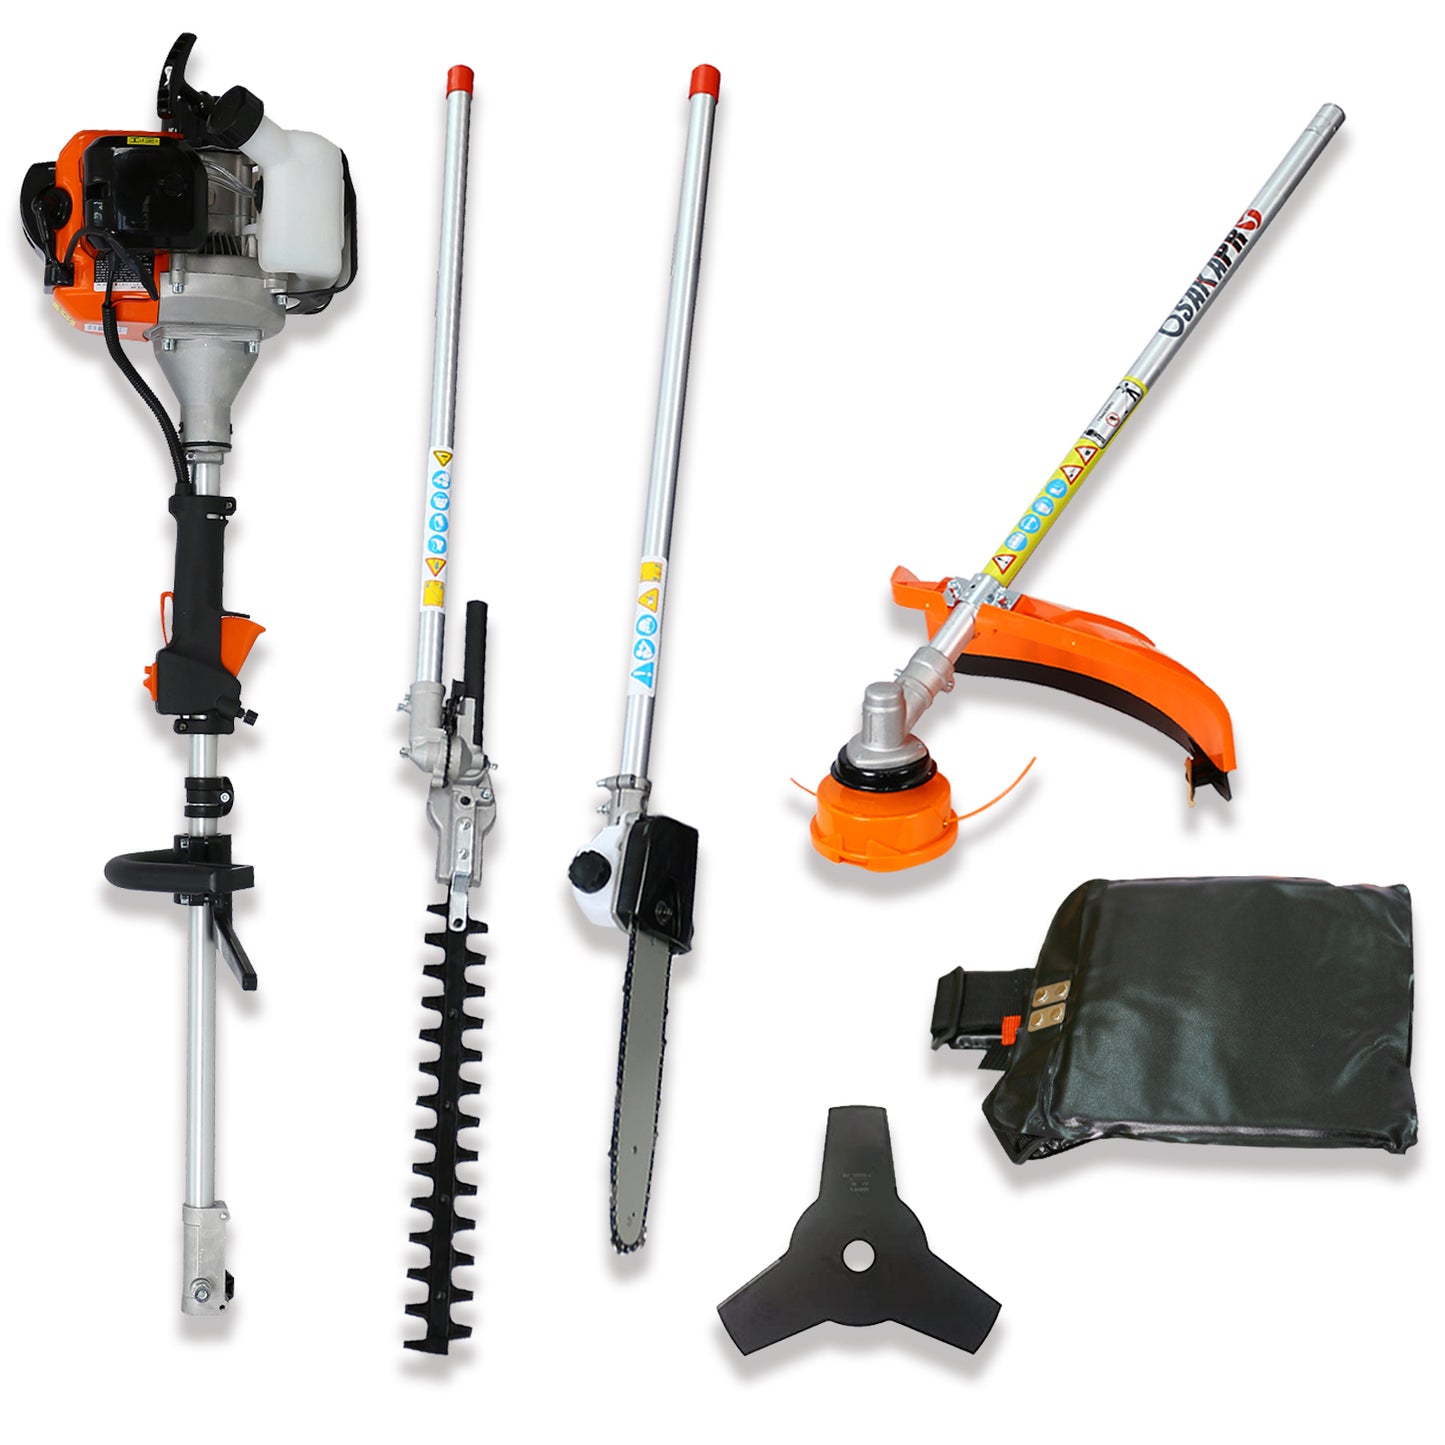 4 in 1 Multi-Functional Trimming Tool, 56CC 2-Cycle Garden Tool System EPA Compliant